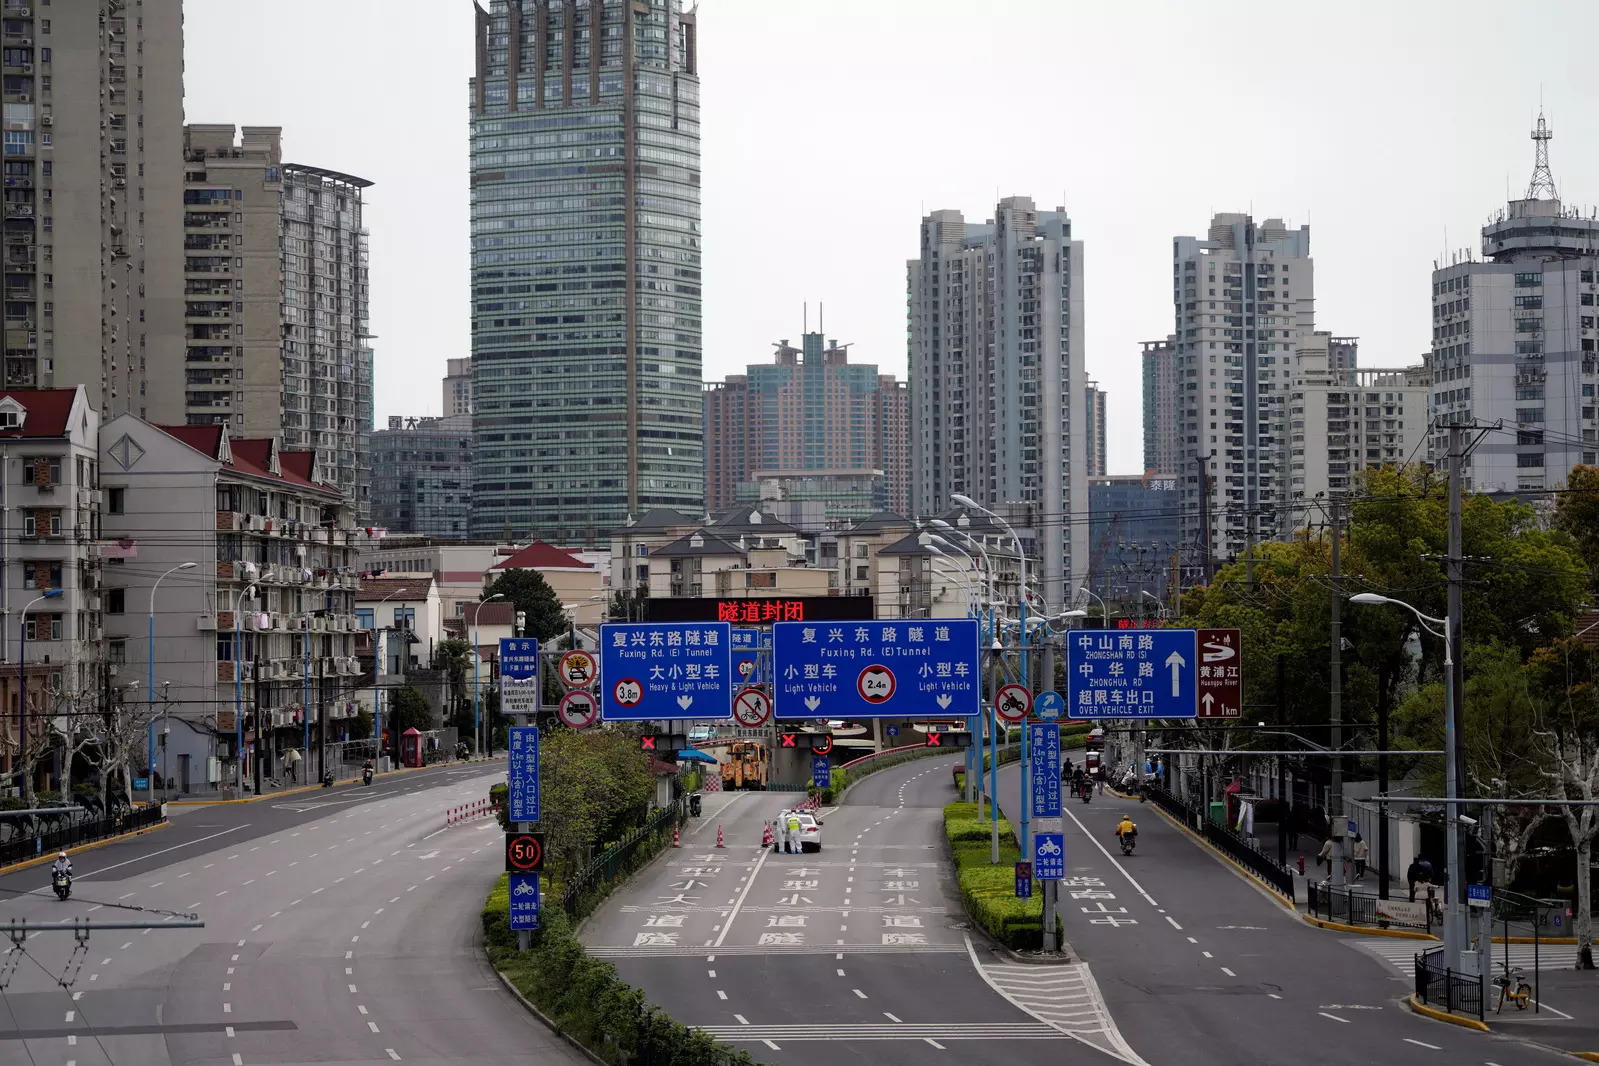 Ghost town: Entire Shanghai placed under Covid lockdown